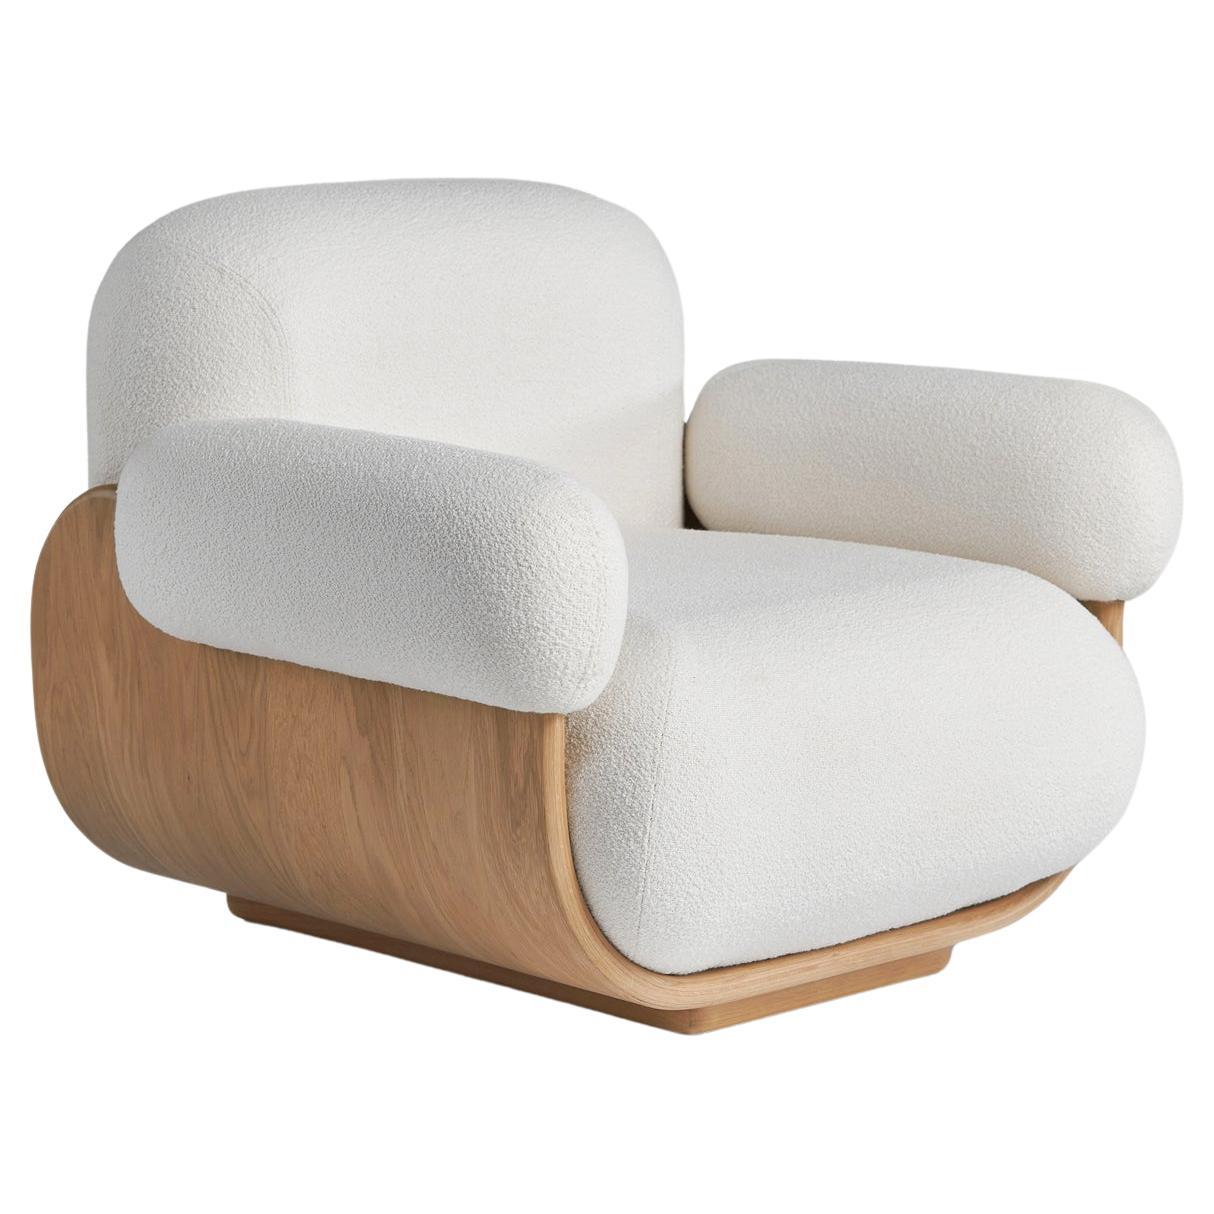 Cannoli Armchair by Arbore x Studio PHAT For Sale